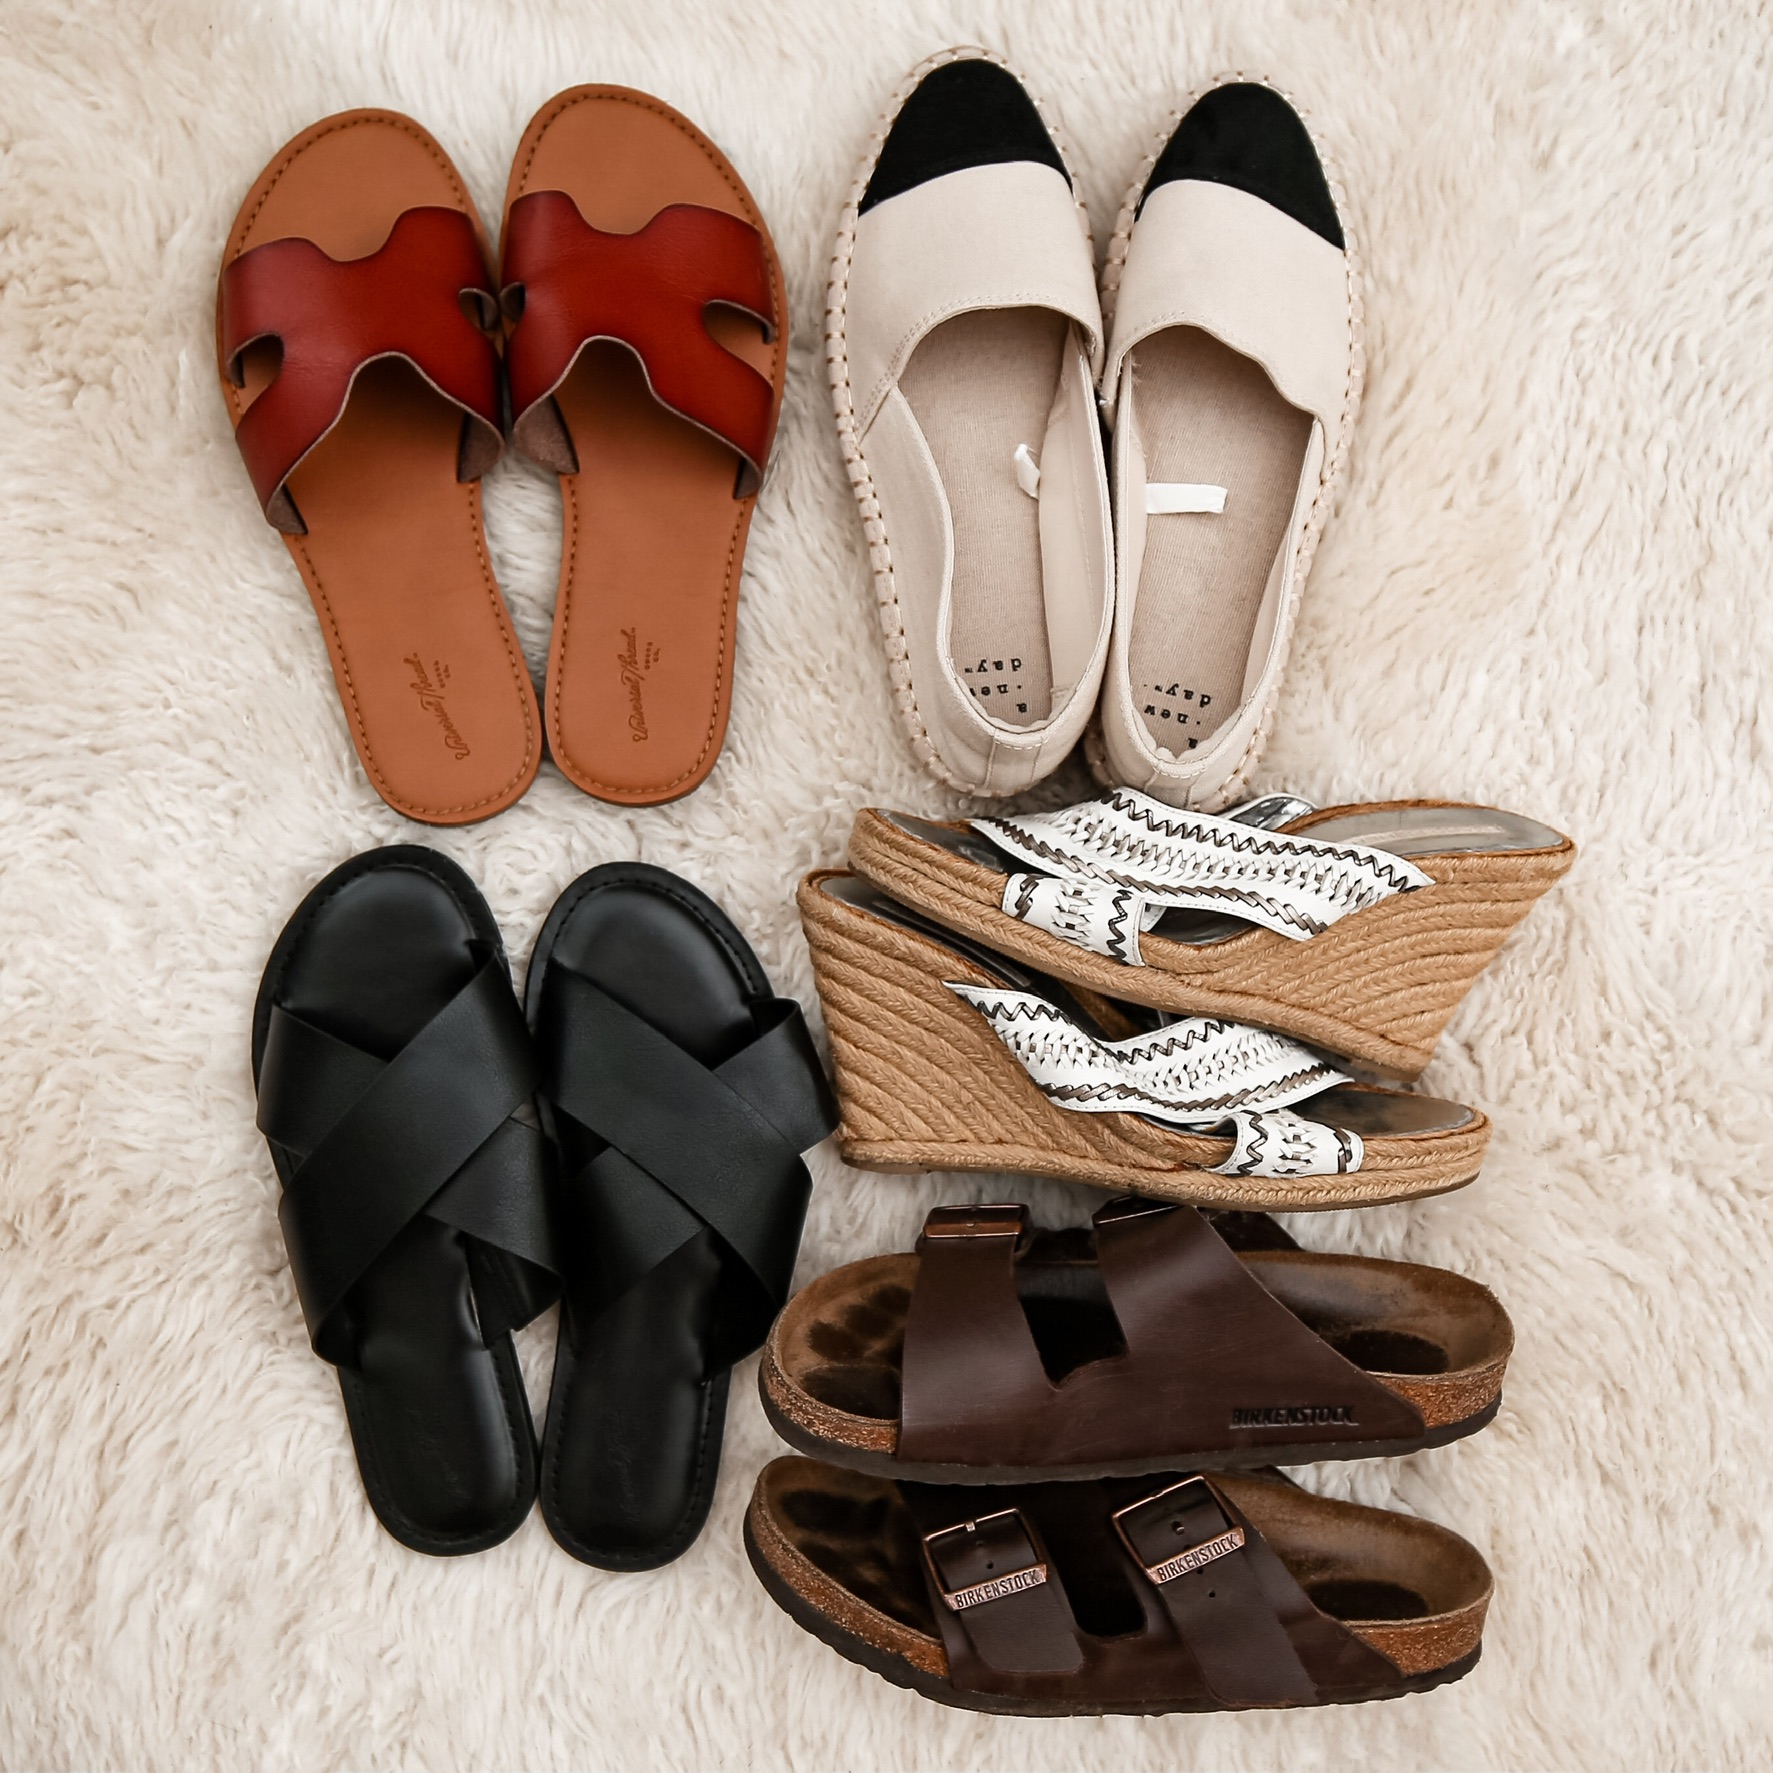 My top picks for summer shoes and dupes